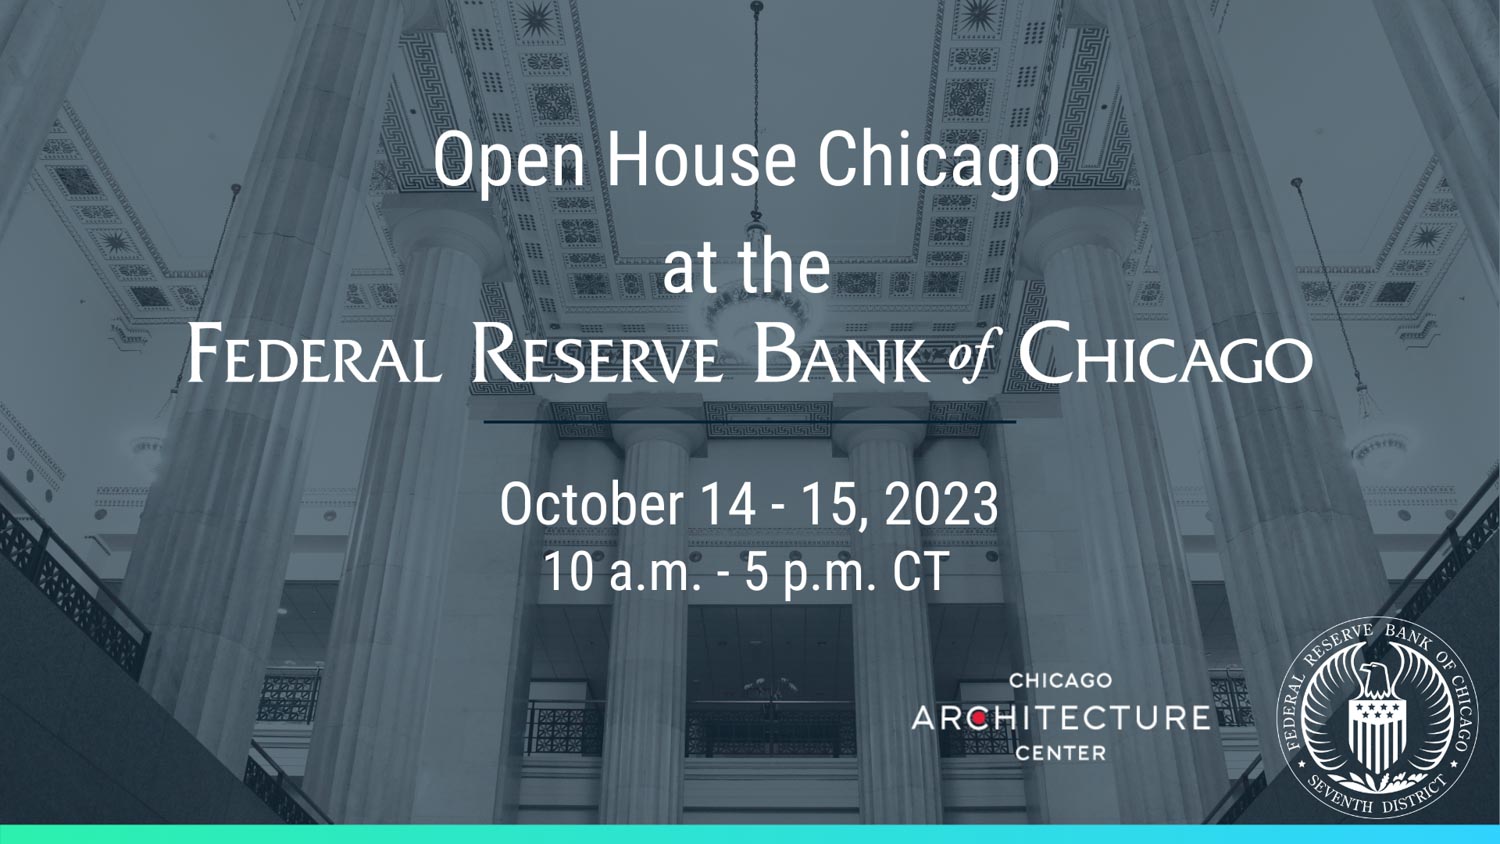 Open House Chicago at the Federal Reserve Bank of Chicago. October 14-15, 2023. 10 am - 5 pm CT.